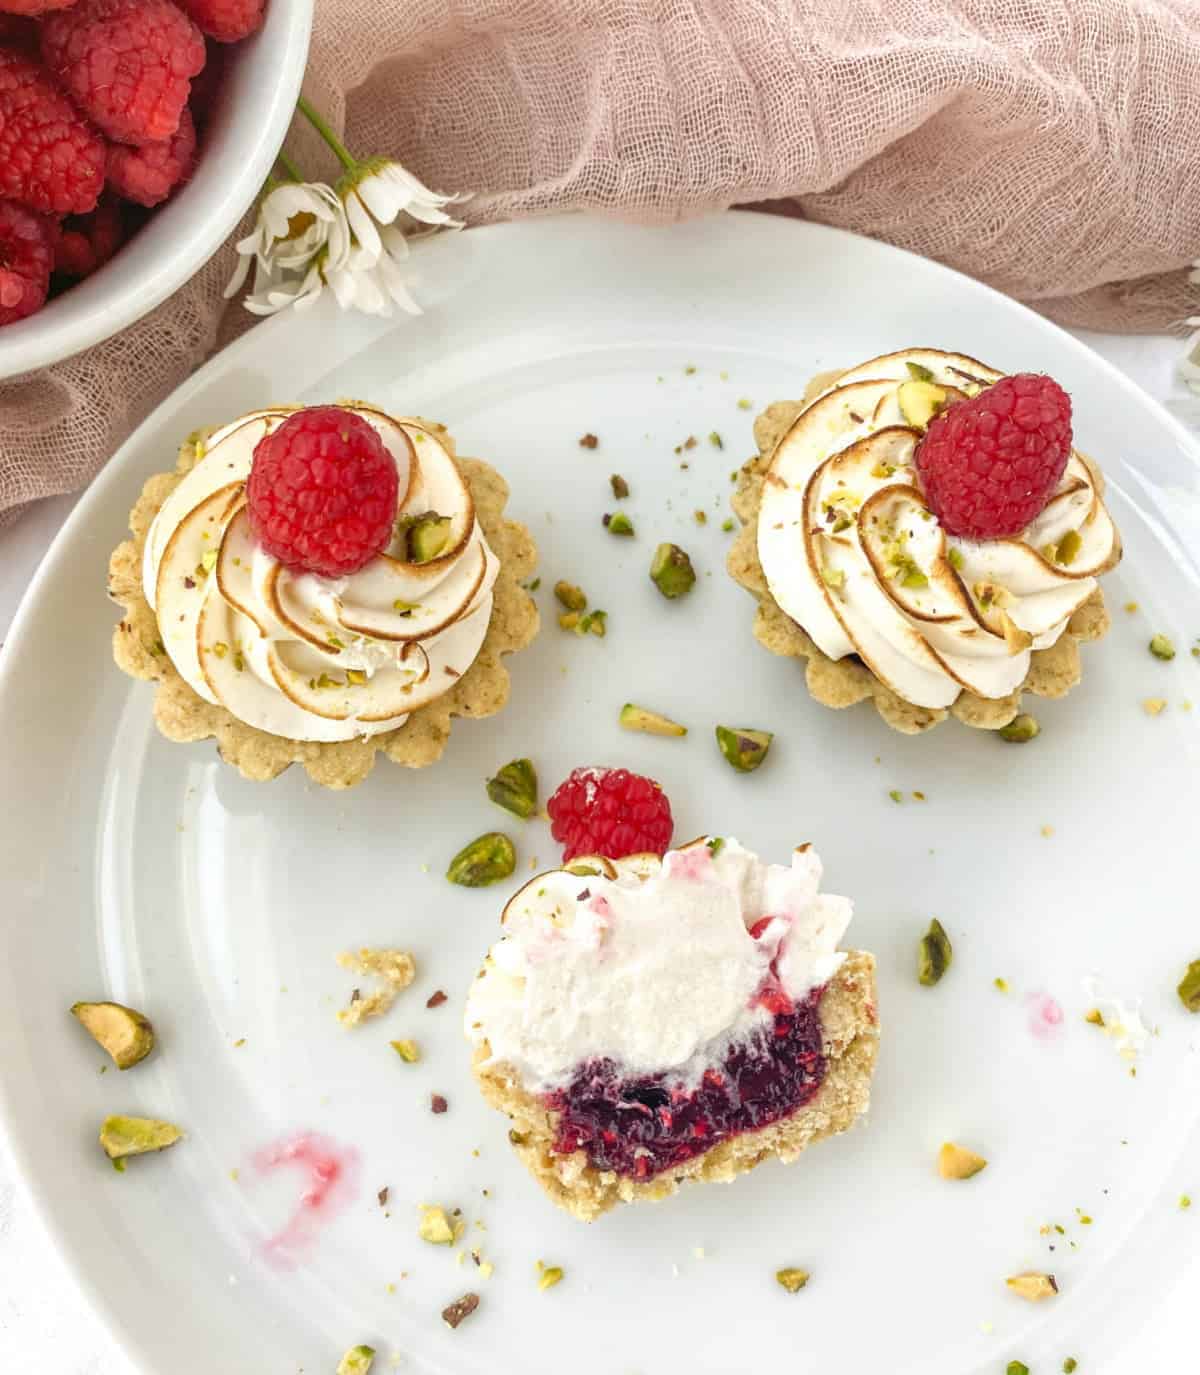 Overhead view of three Raspberry Pistachio Tartlets on a white plate with chopped pistachios. One of the tartlets has been cut in half and is lying on its side.